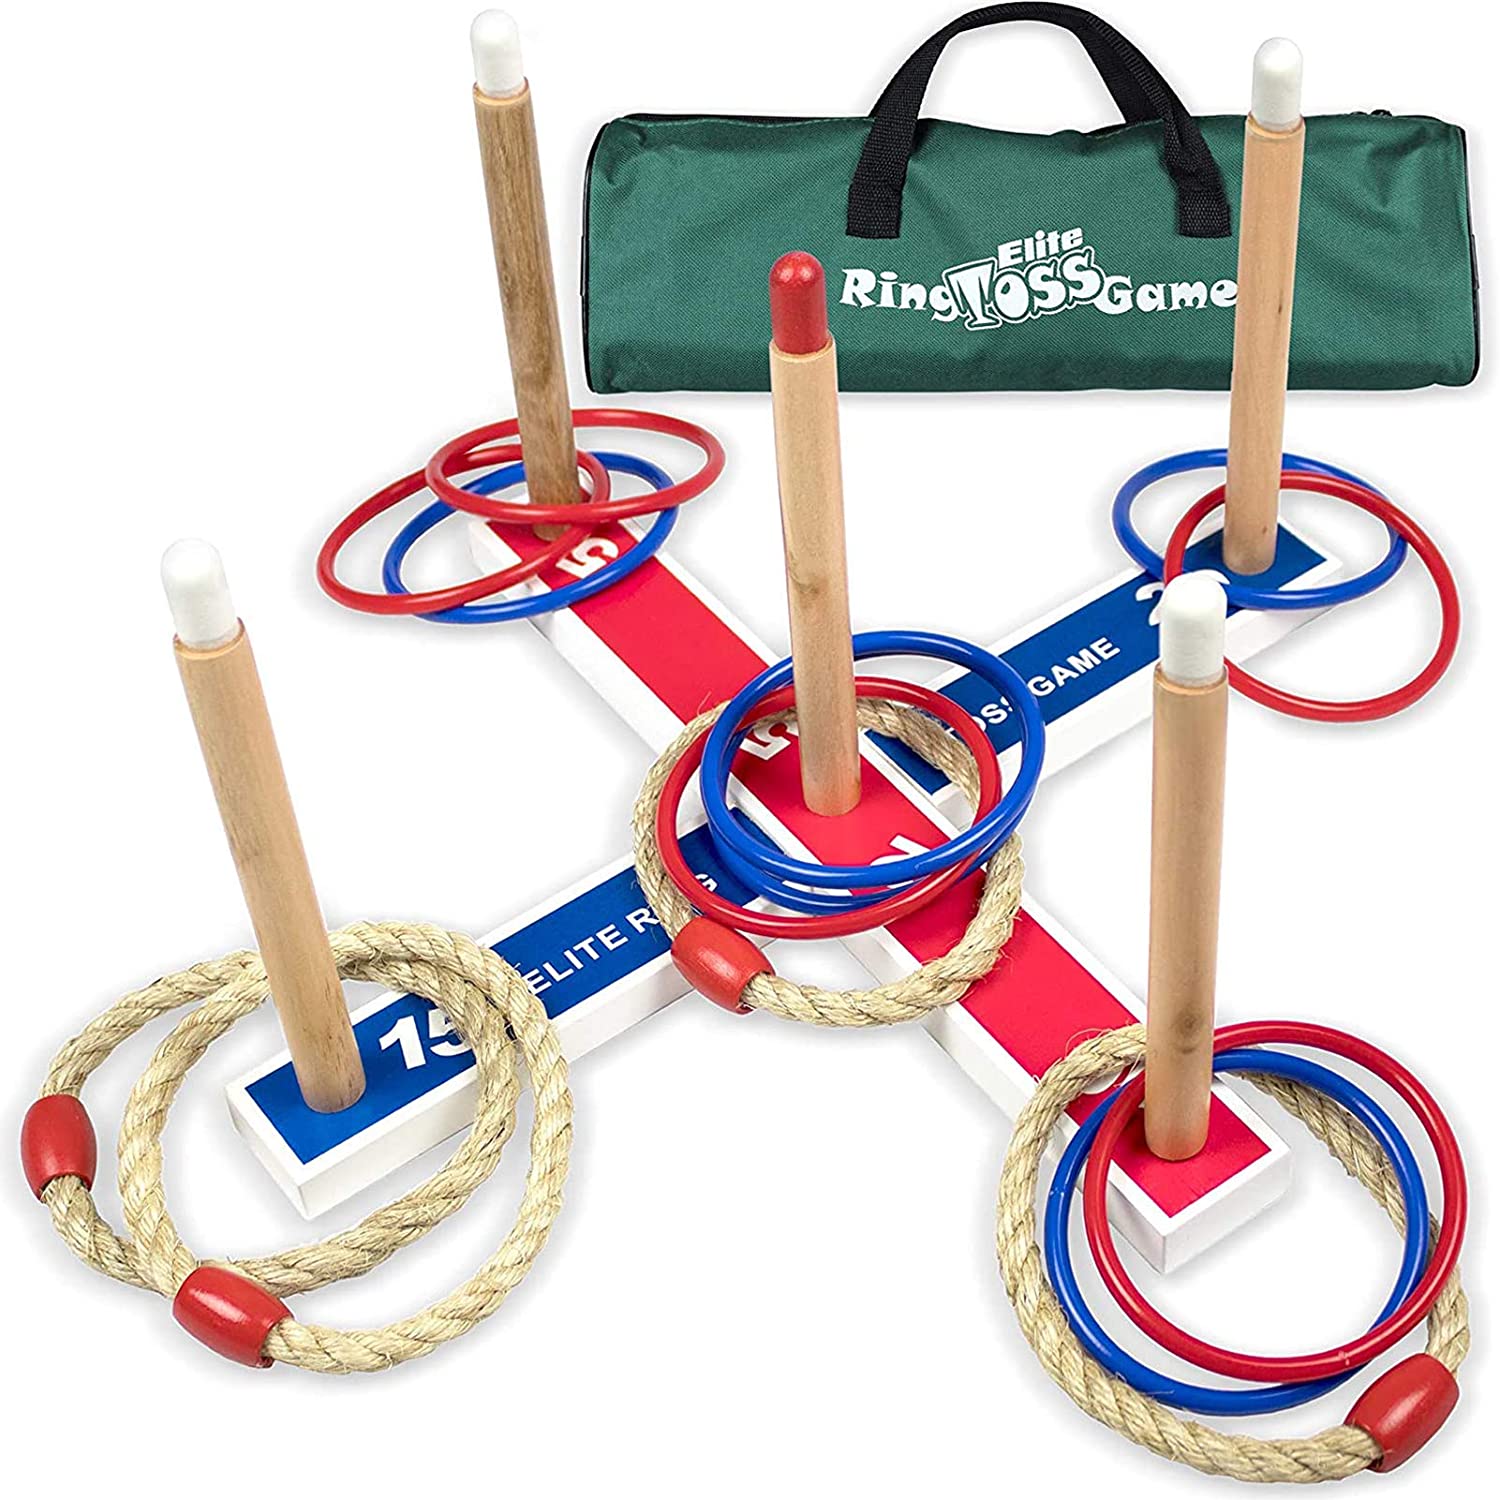 Elite Ring Toss Yard Game for Adults and Family $16.97 - Amazon